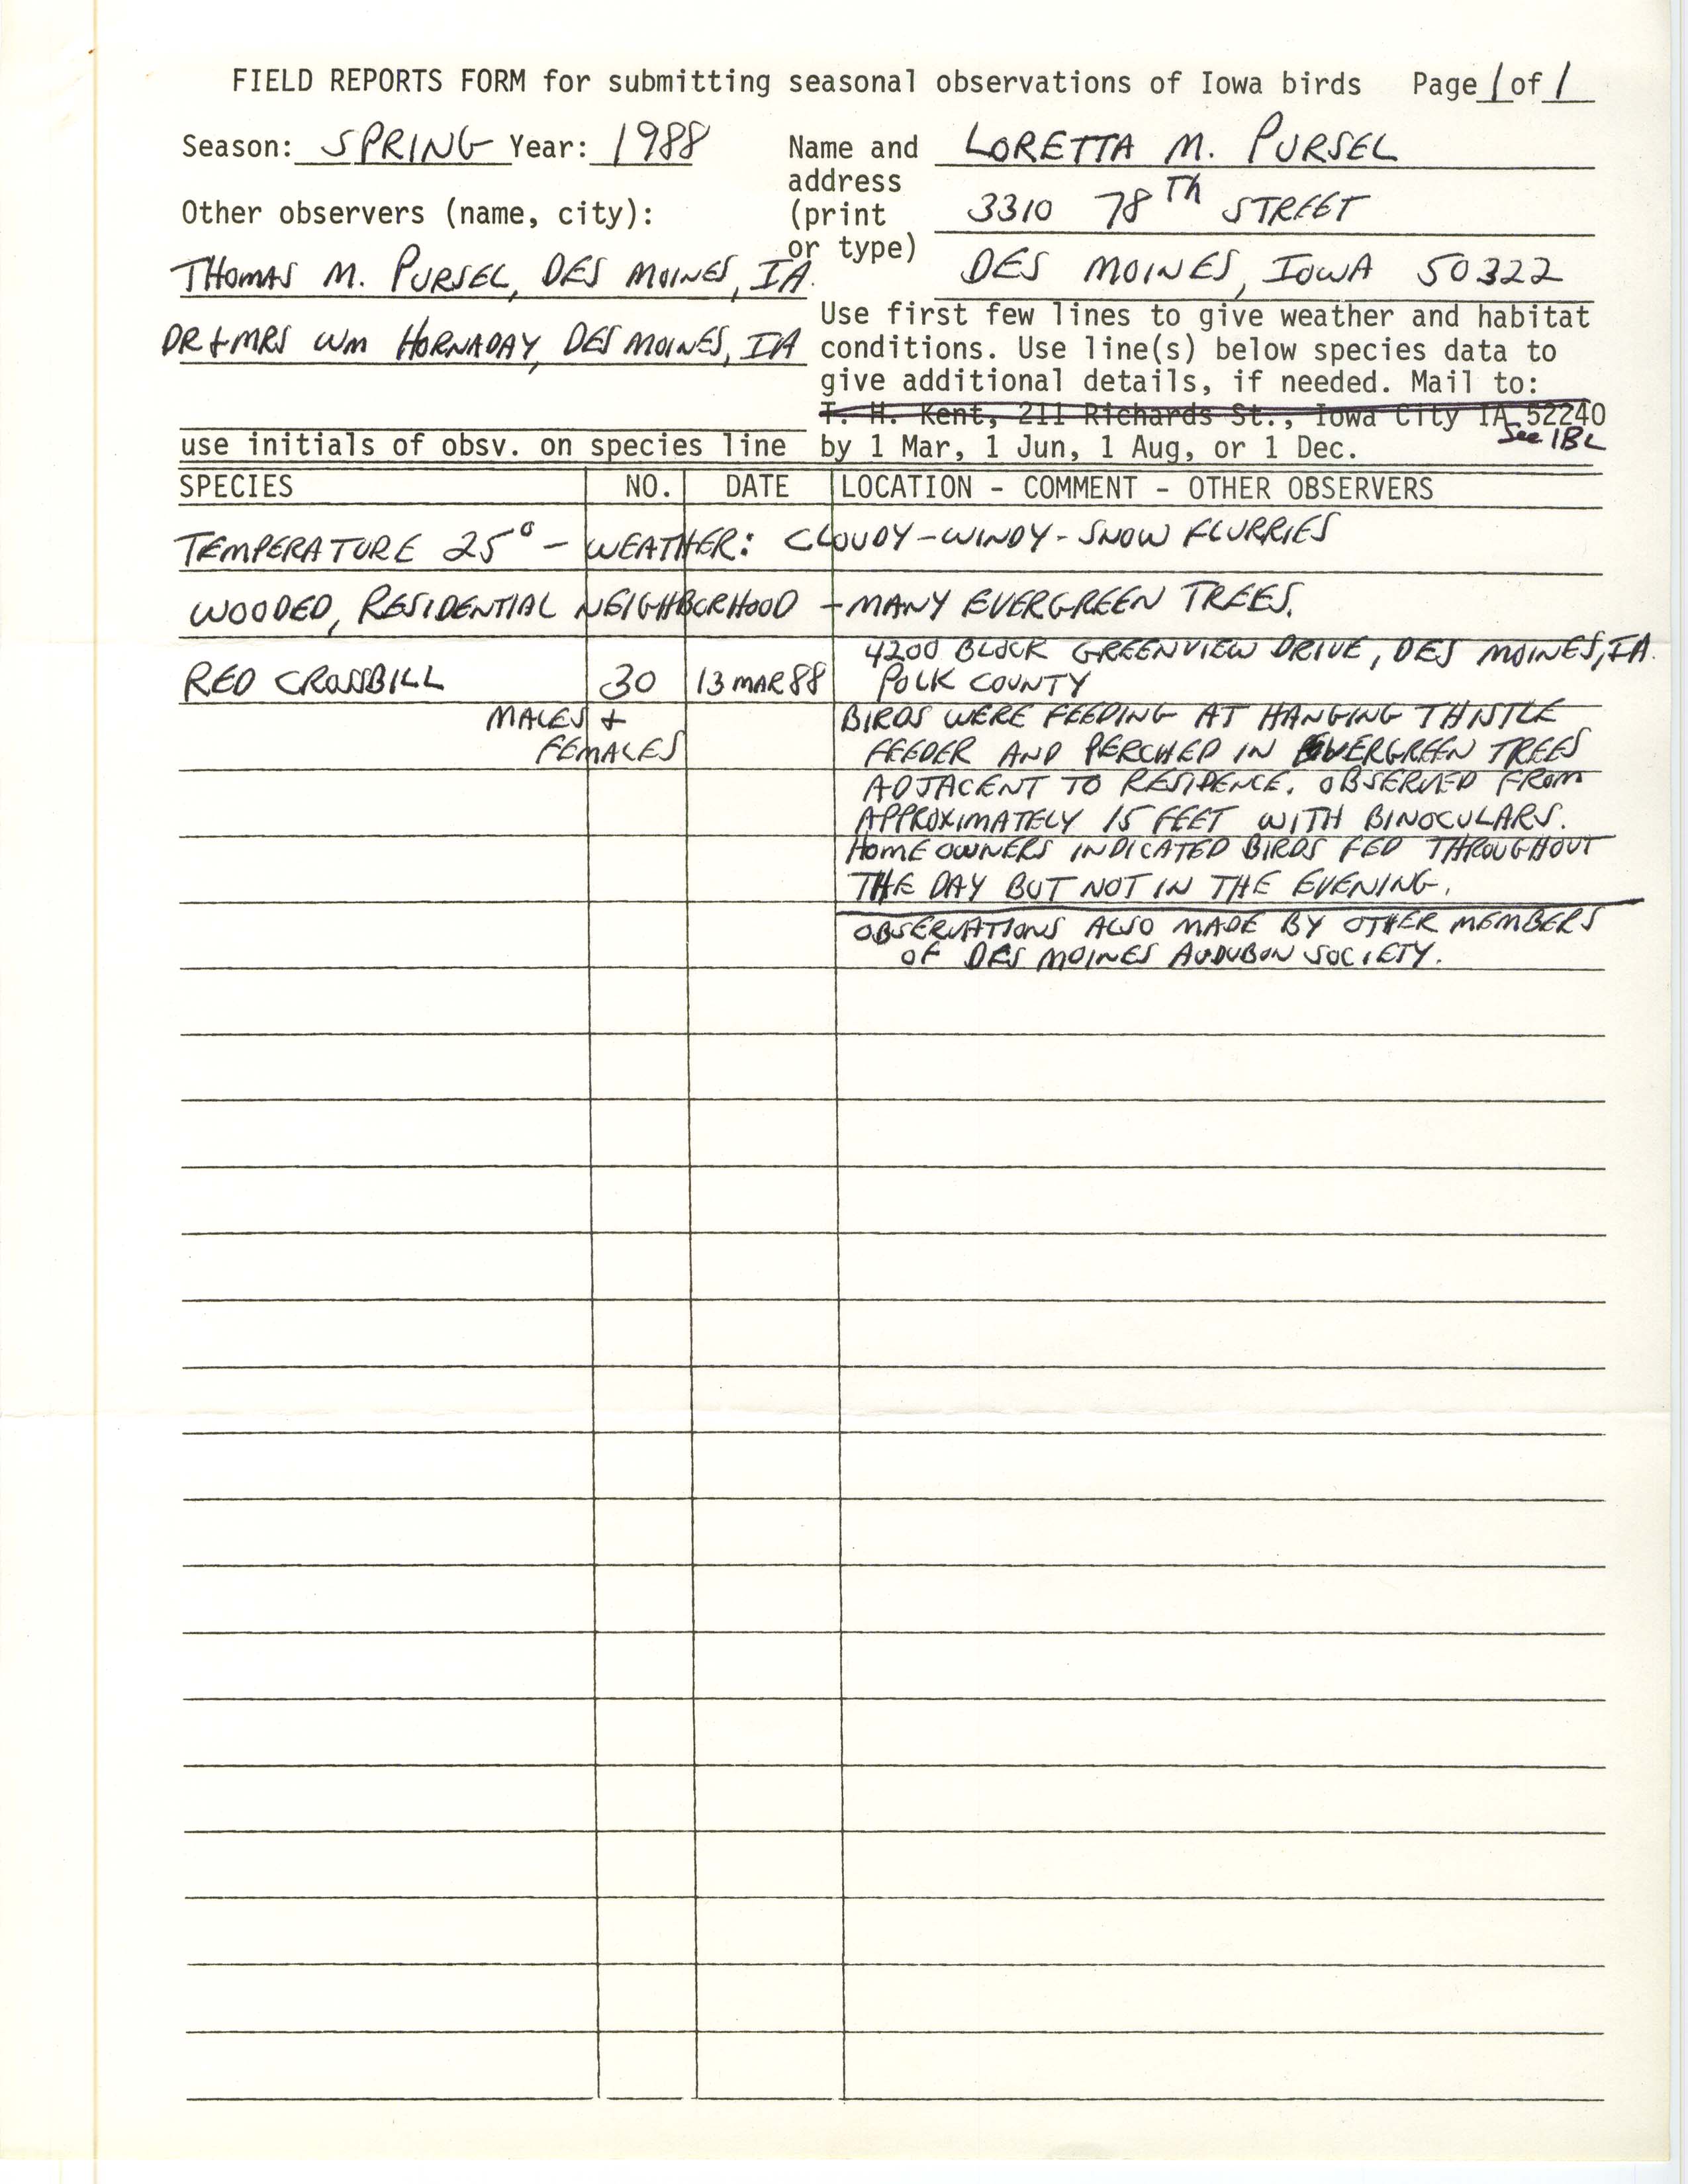 Field reports form for submitting seasonal observations of Iowa birds, Loretta M. Pursel, spring 1988